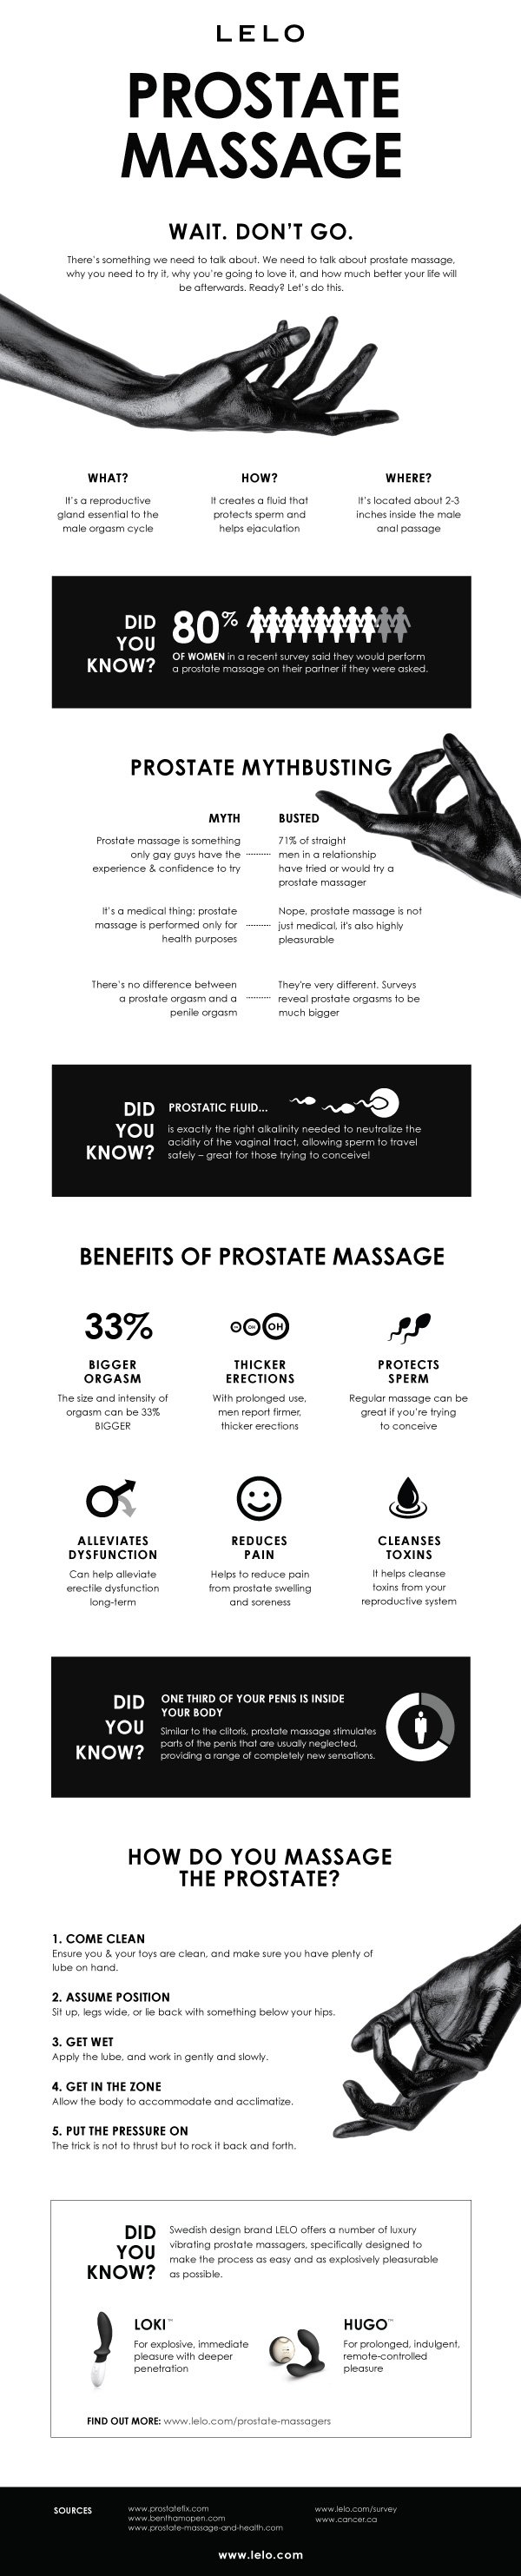 What Is Prostate Massage? What are the Benefits?